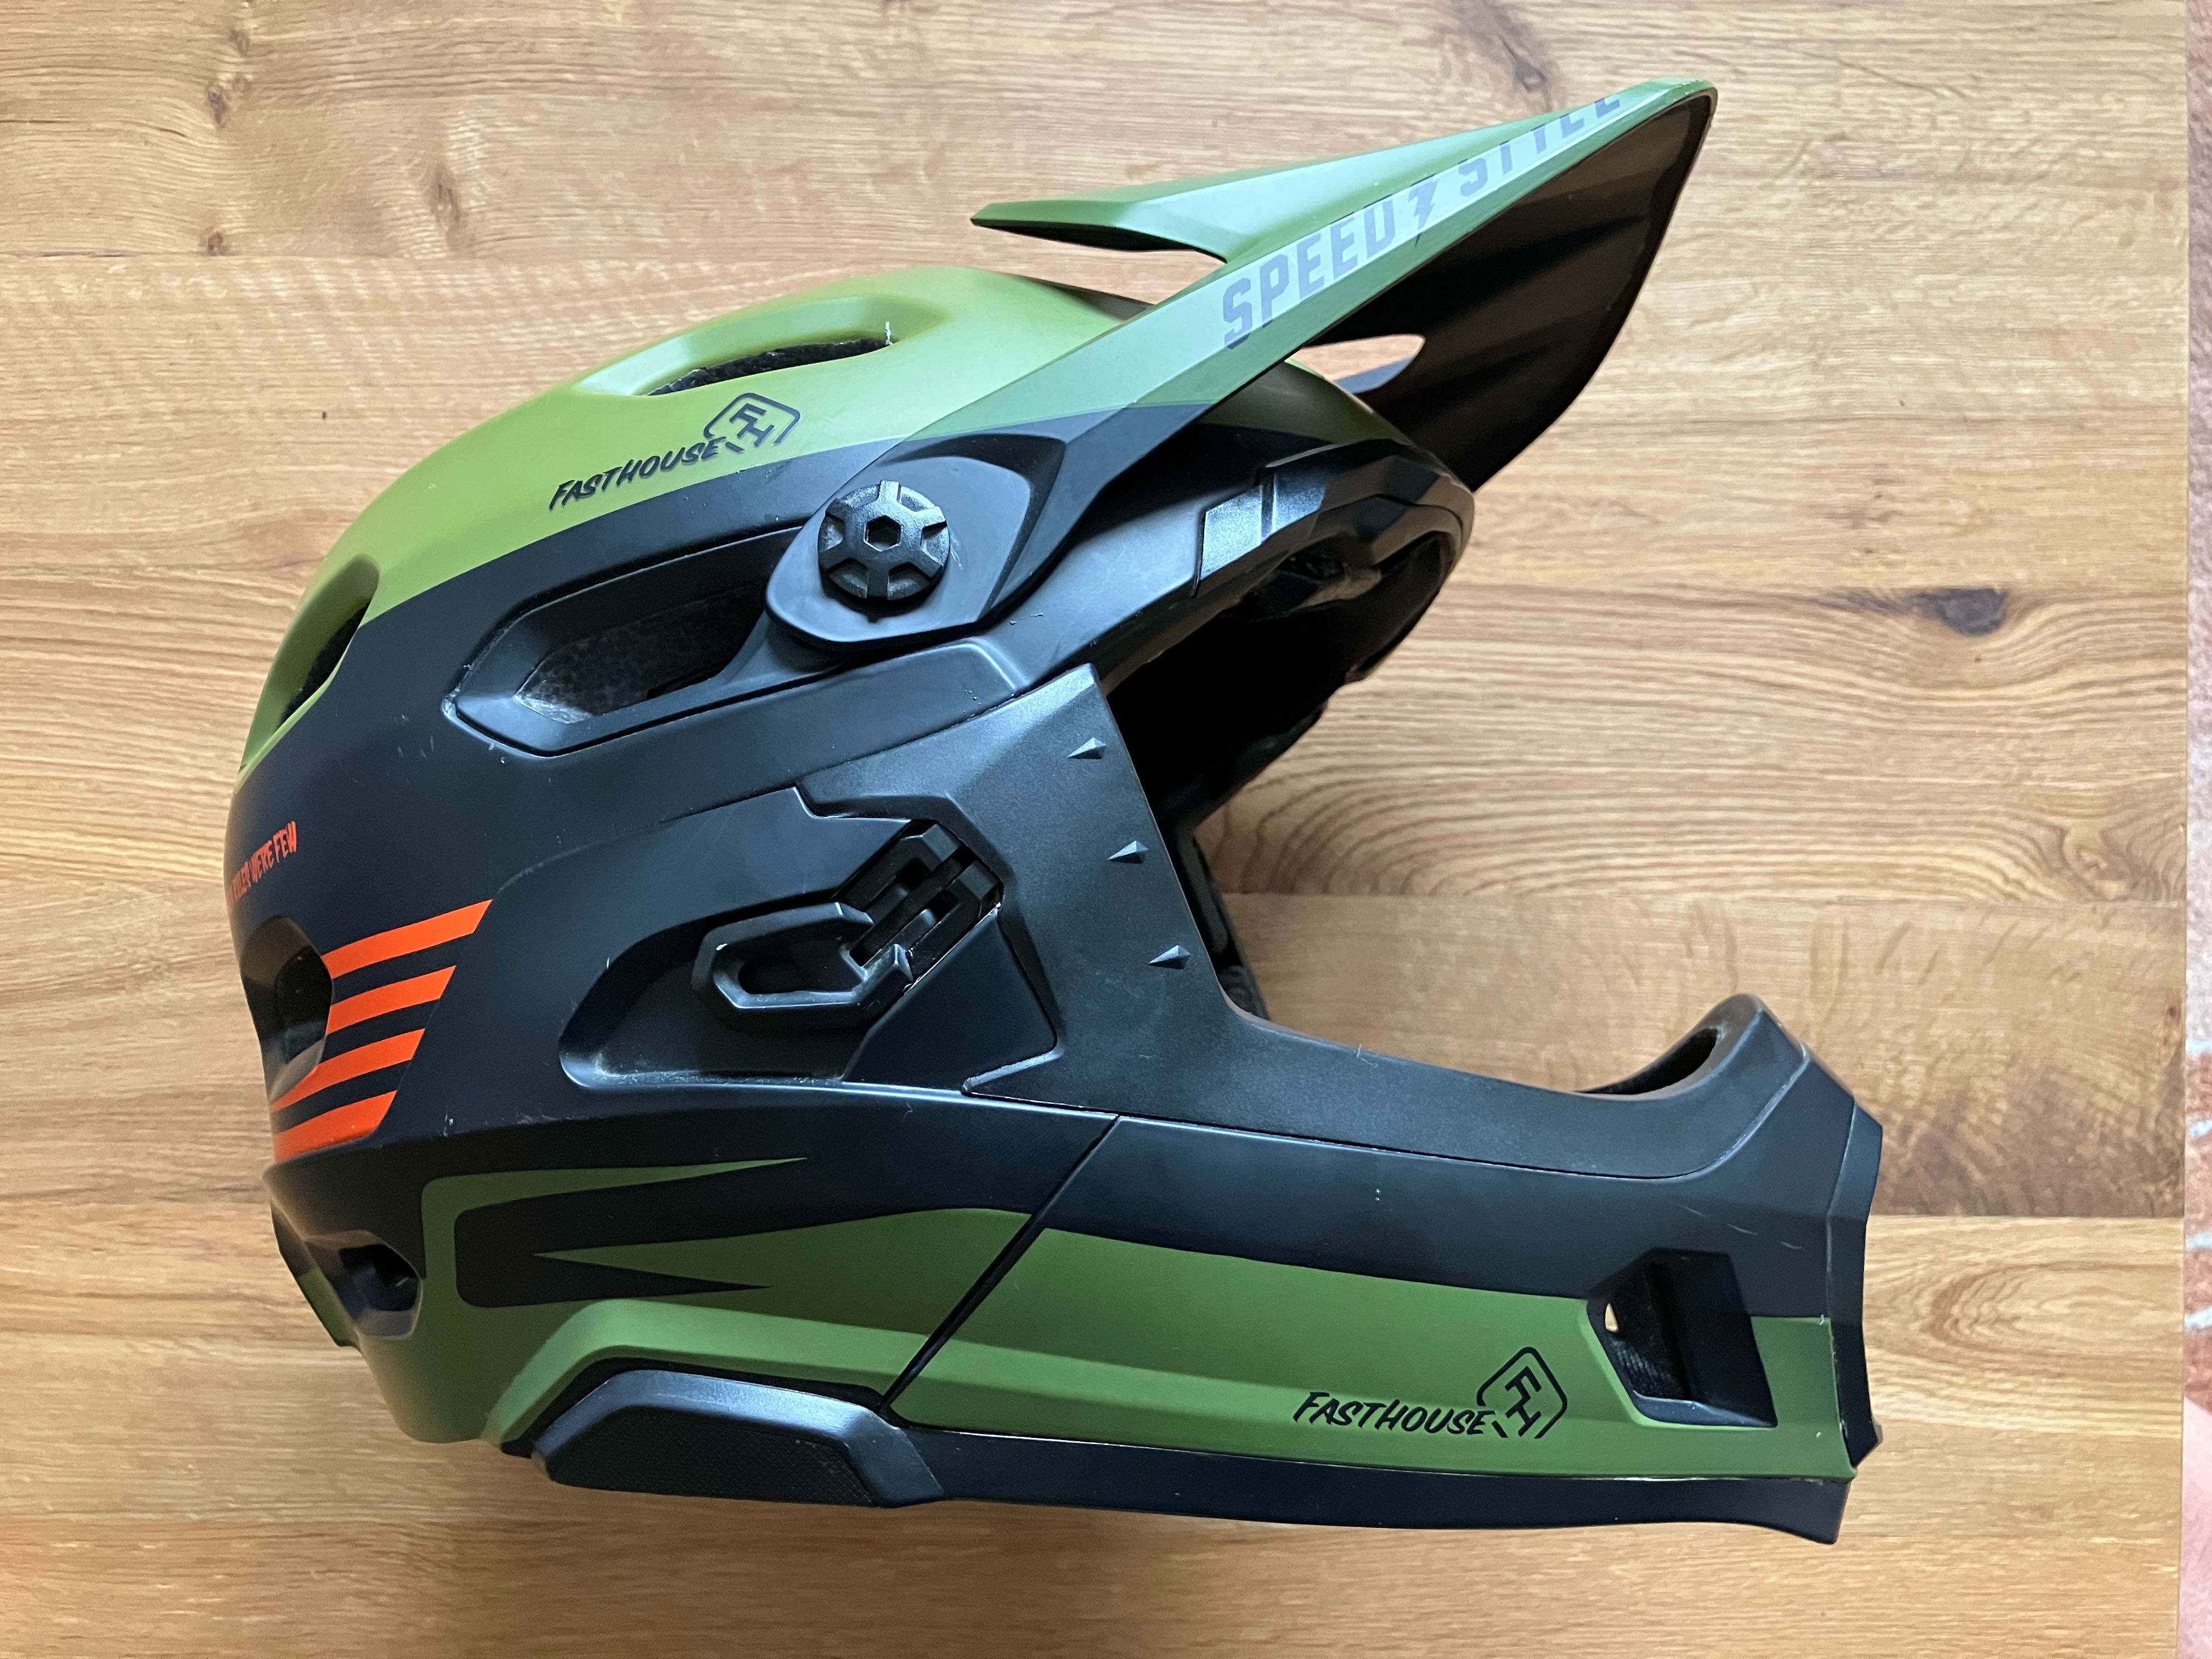 Kask BELL Super DH MIPS Fasthouse, matte green/orange, (L) 50% ceny!